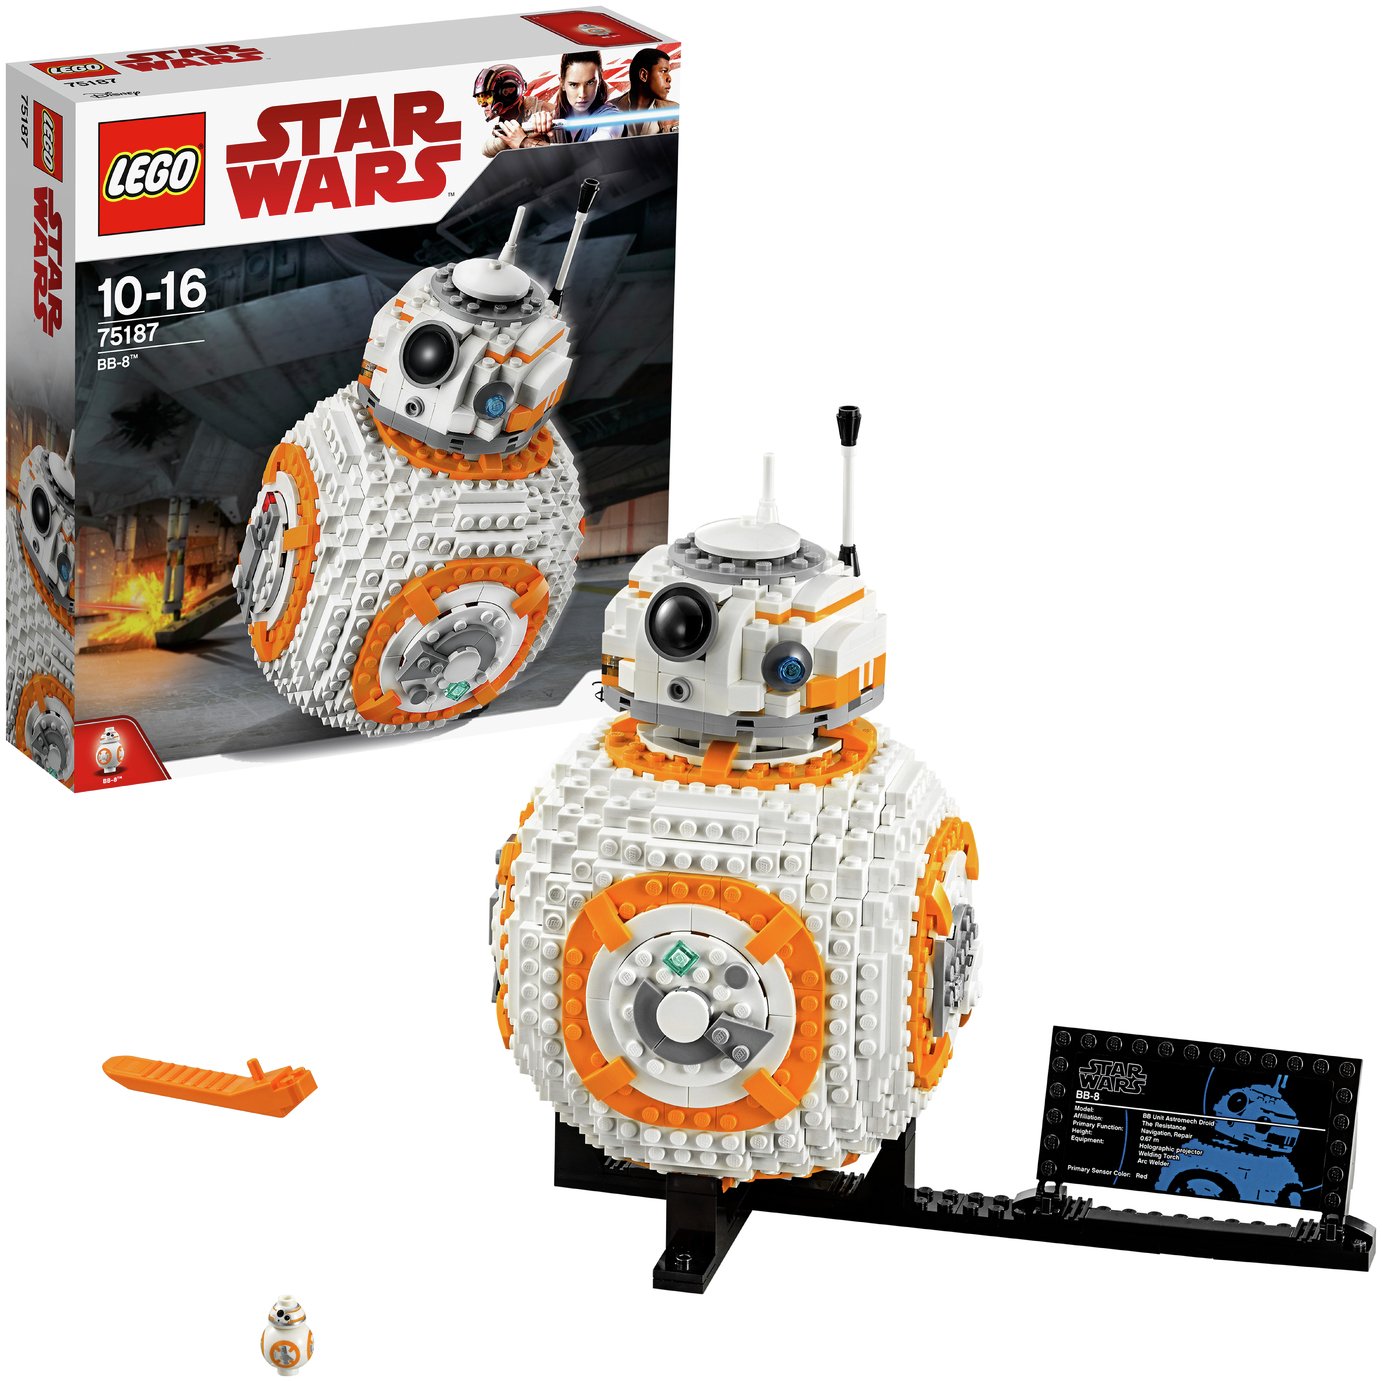 LEGO Star Wars BB8 Robot Toy Building Kit review